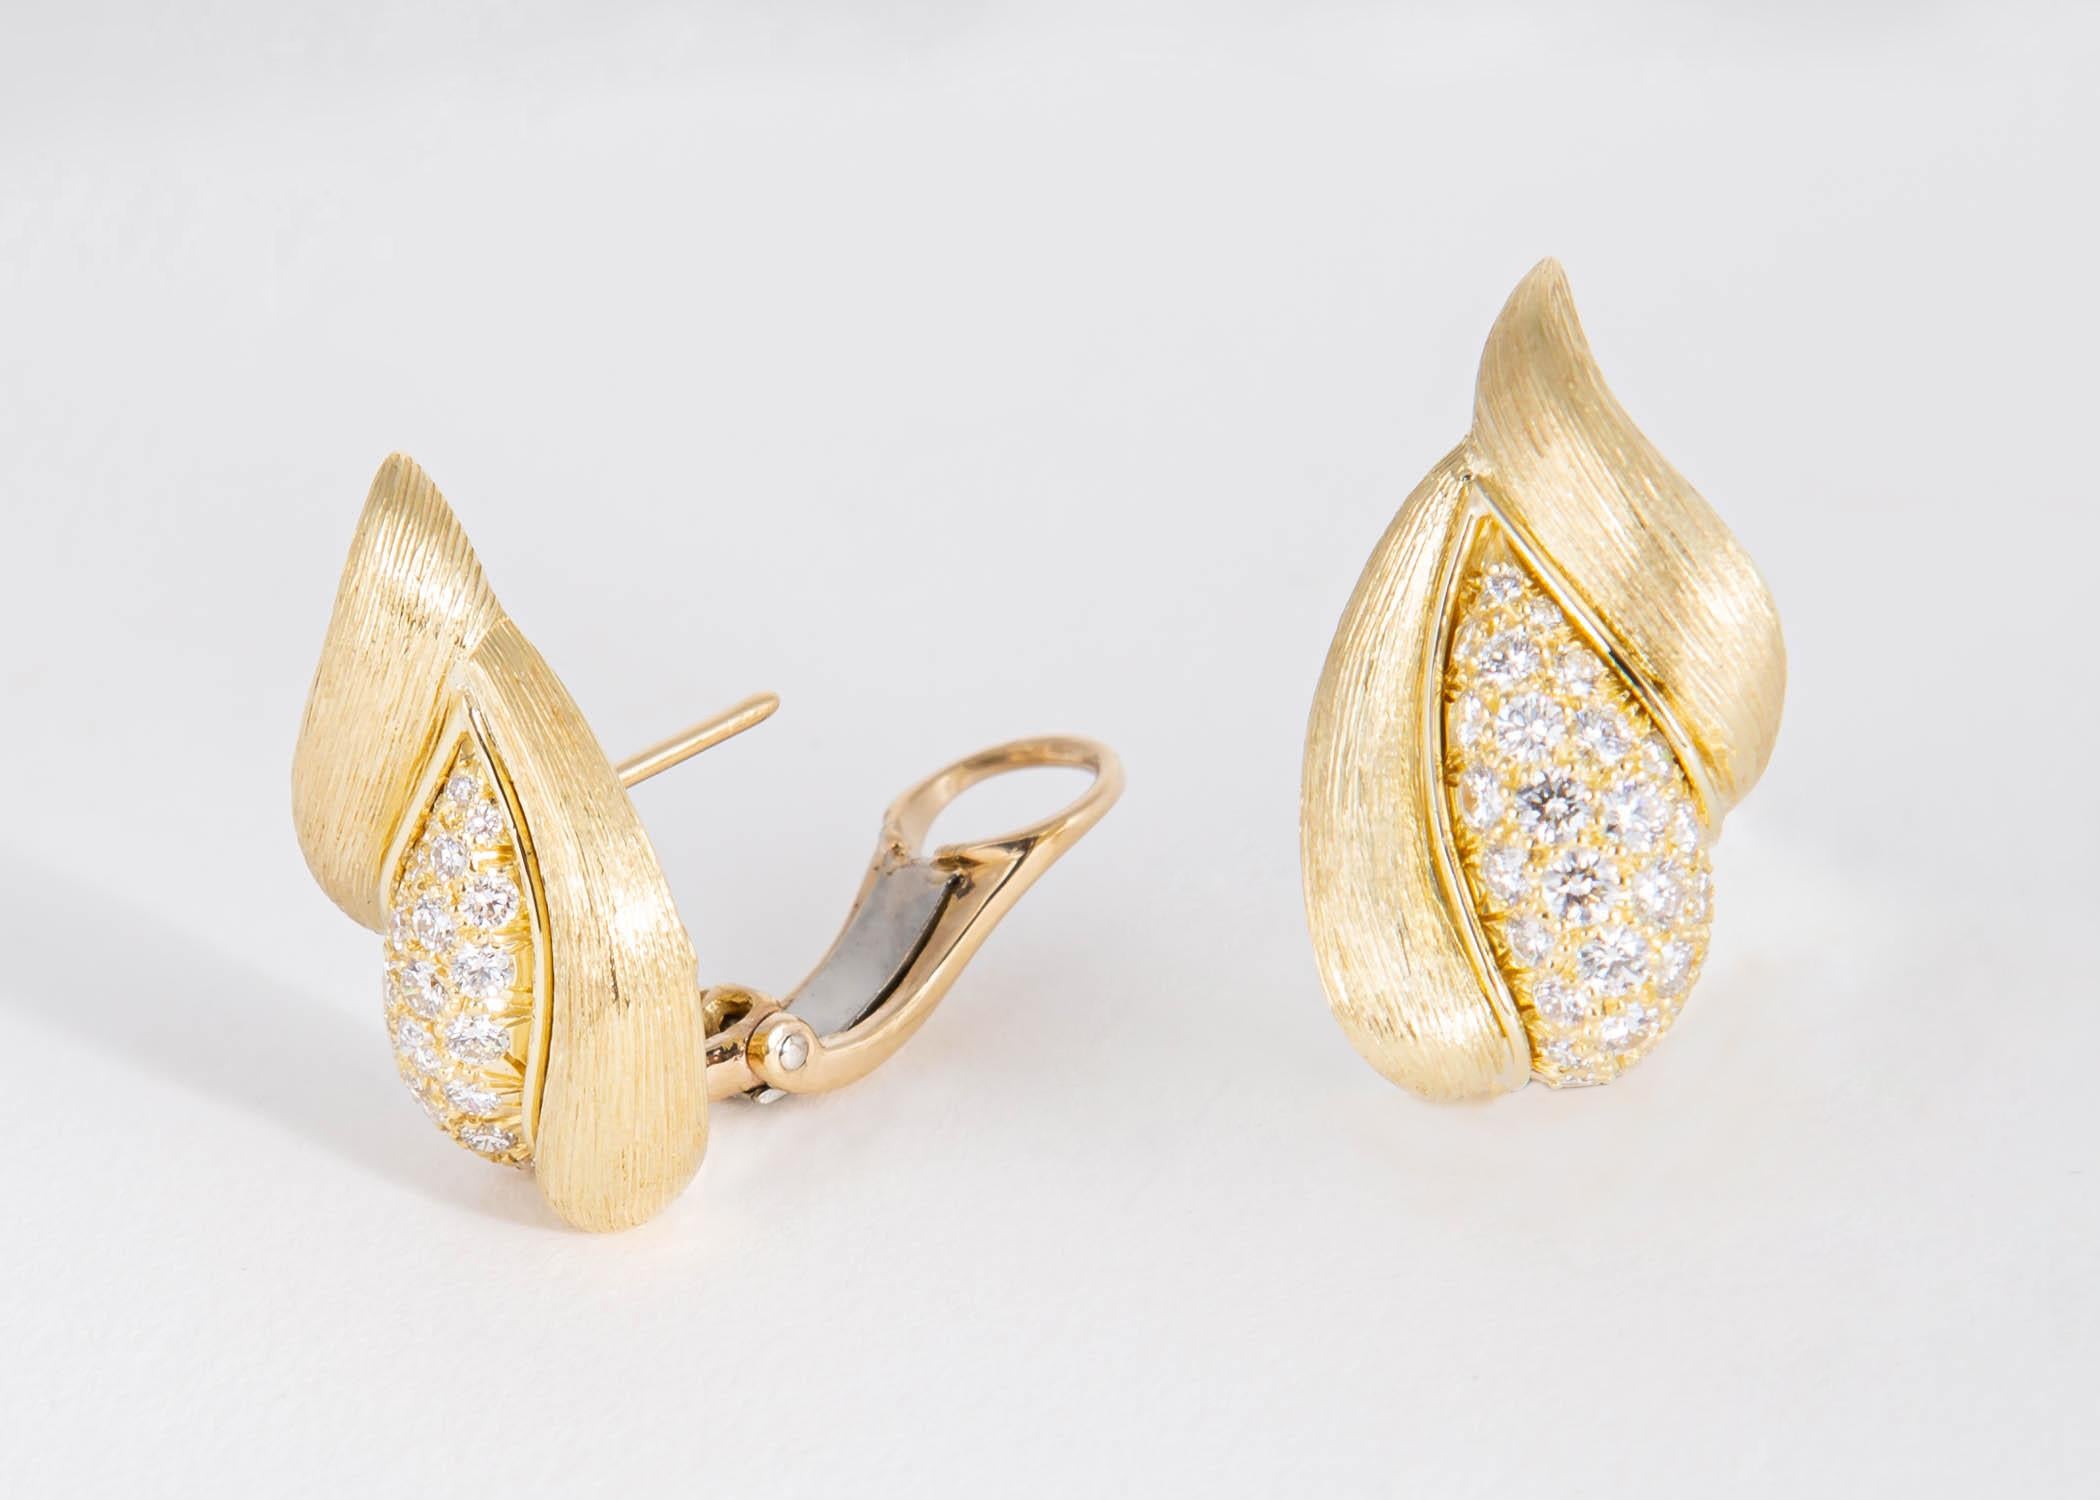 Henry Dunay's Sabi collection features completely hand engraved and finished 18k gold. He has combined brilliant cut diamonds in this soft flattering shaped design that can go from daytime to evening. Approximately 1 inch in length. 1.54 carats